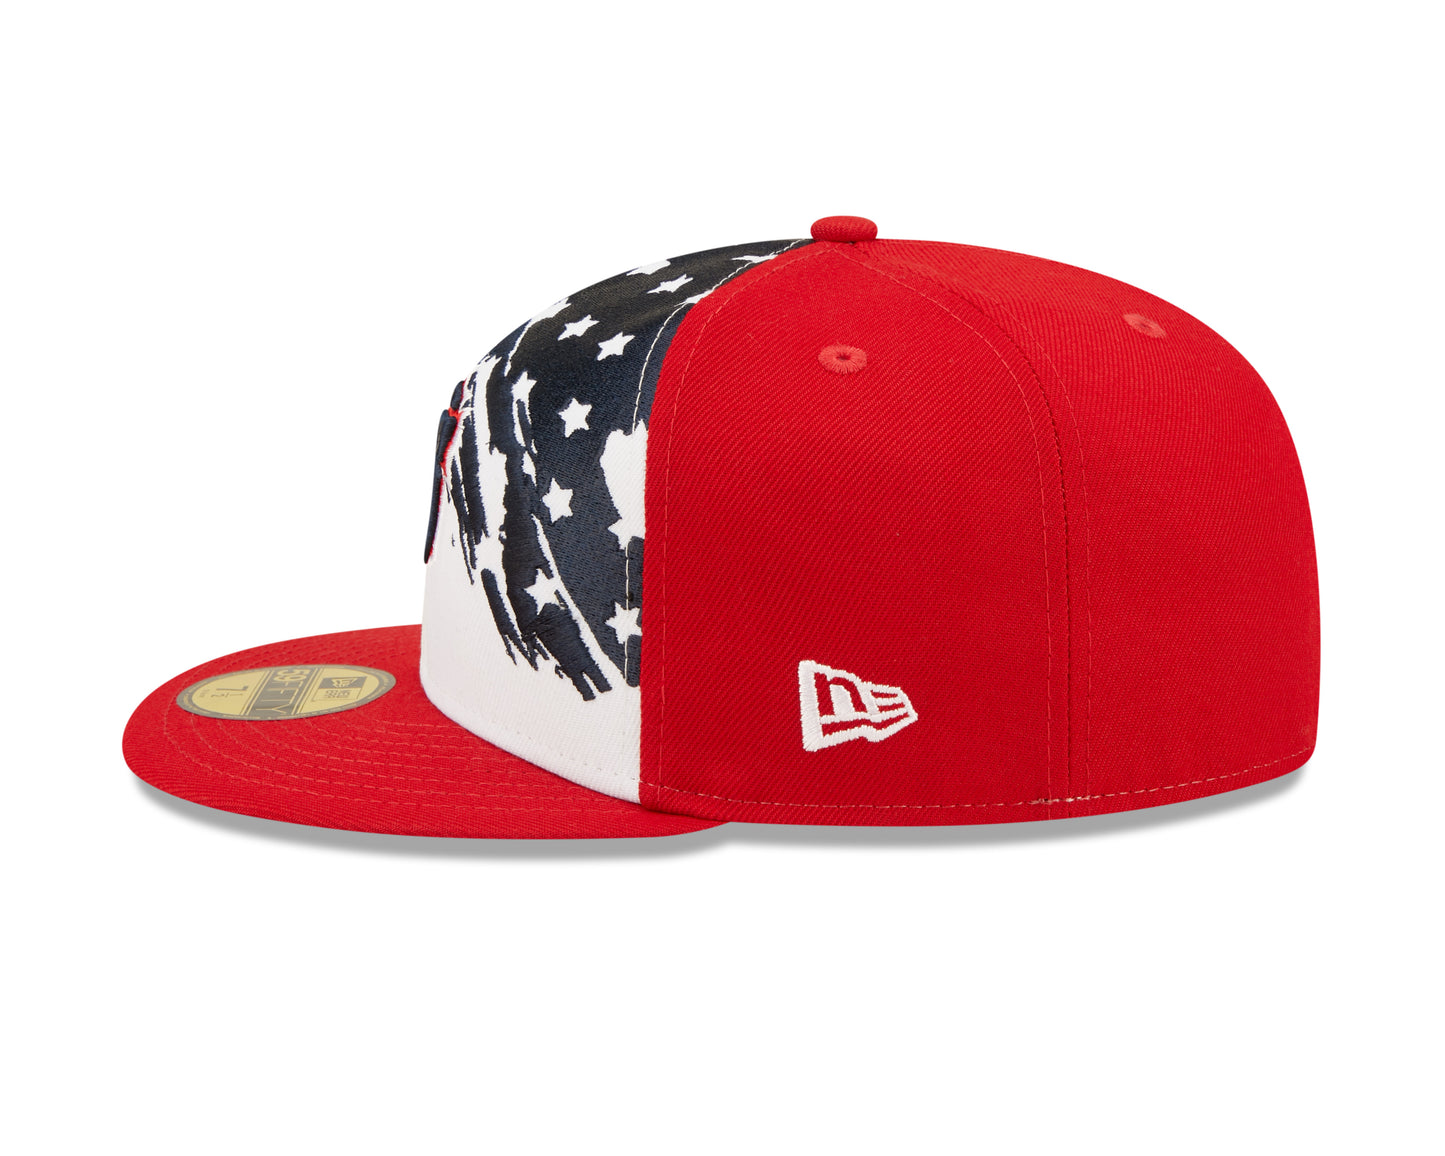 San Francisco Giants Stars and Stripes July 4th 59fifty Fitted Hats